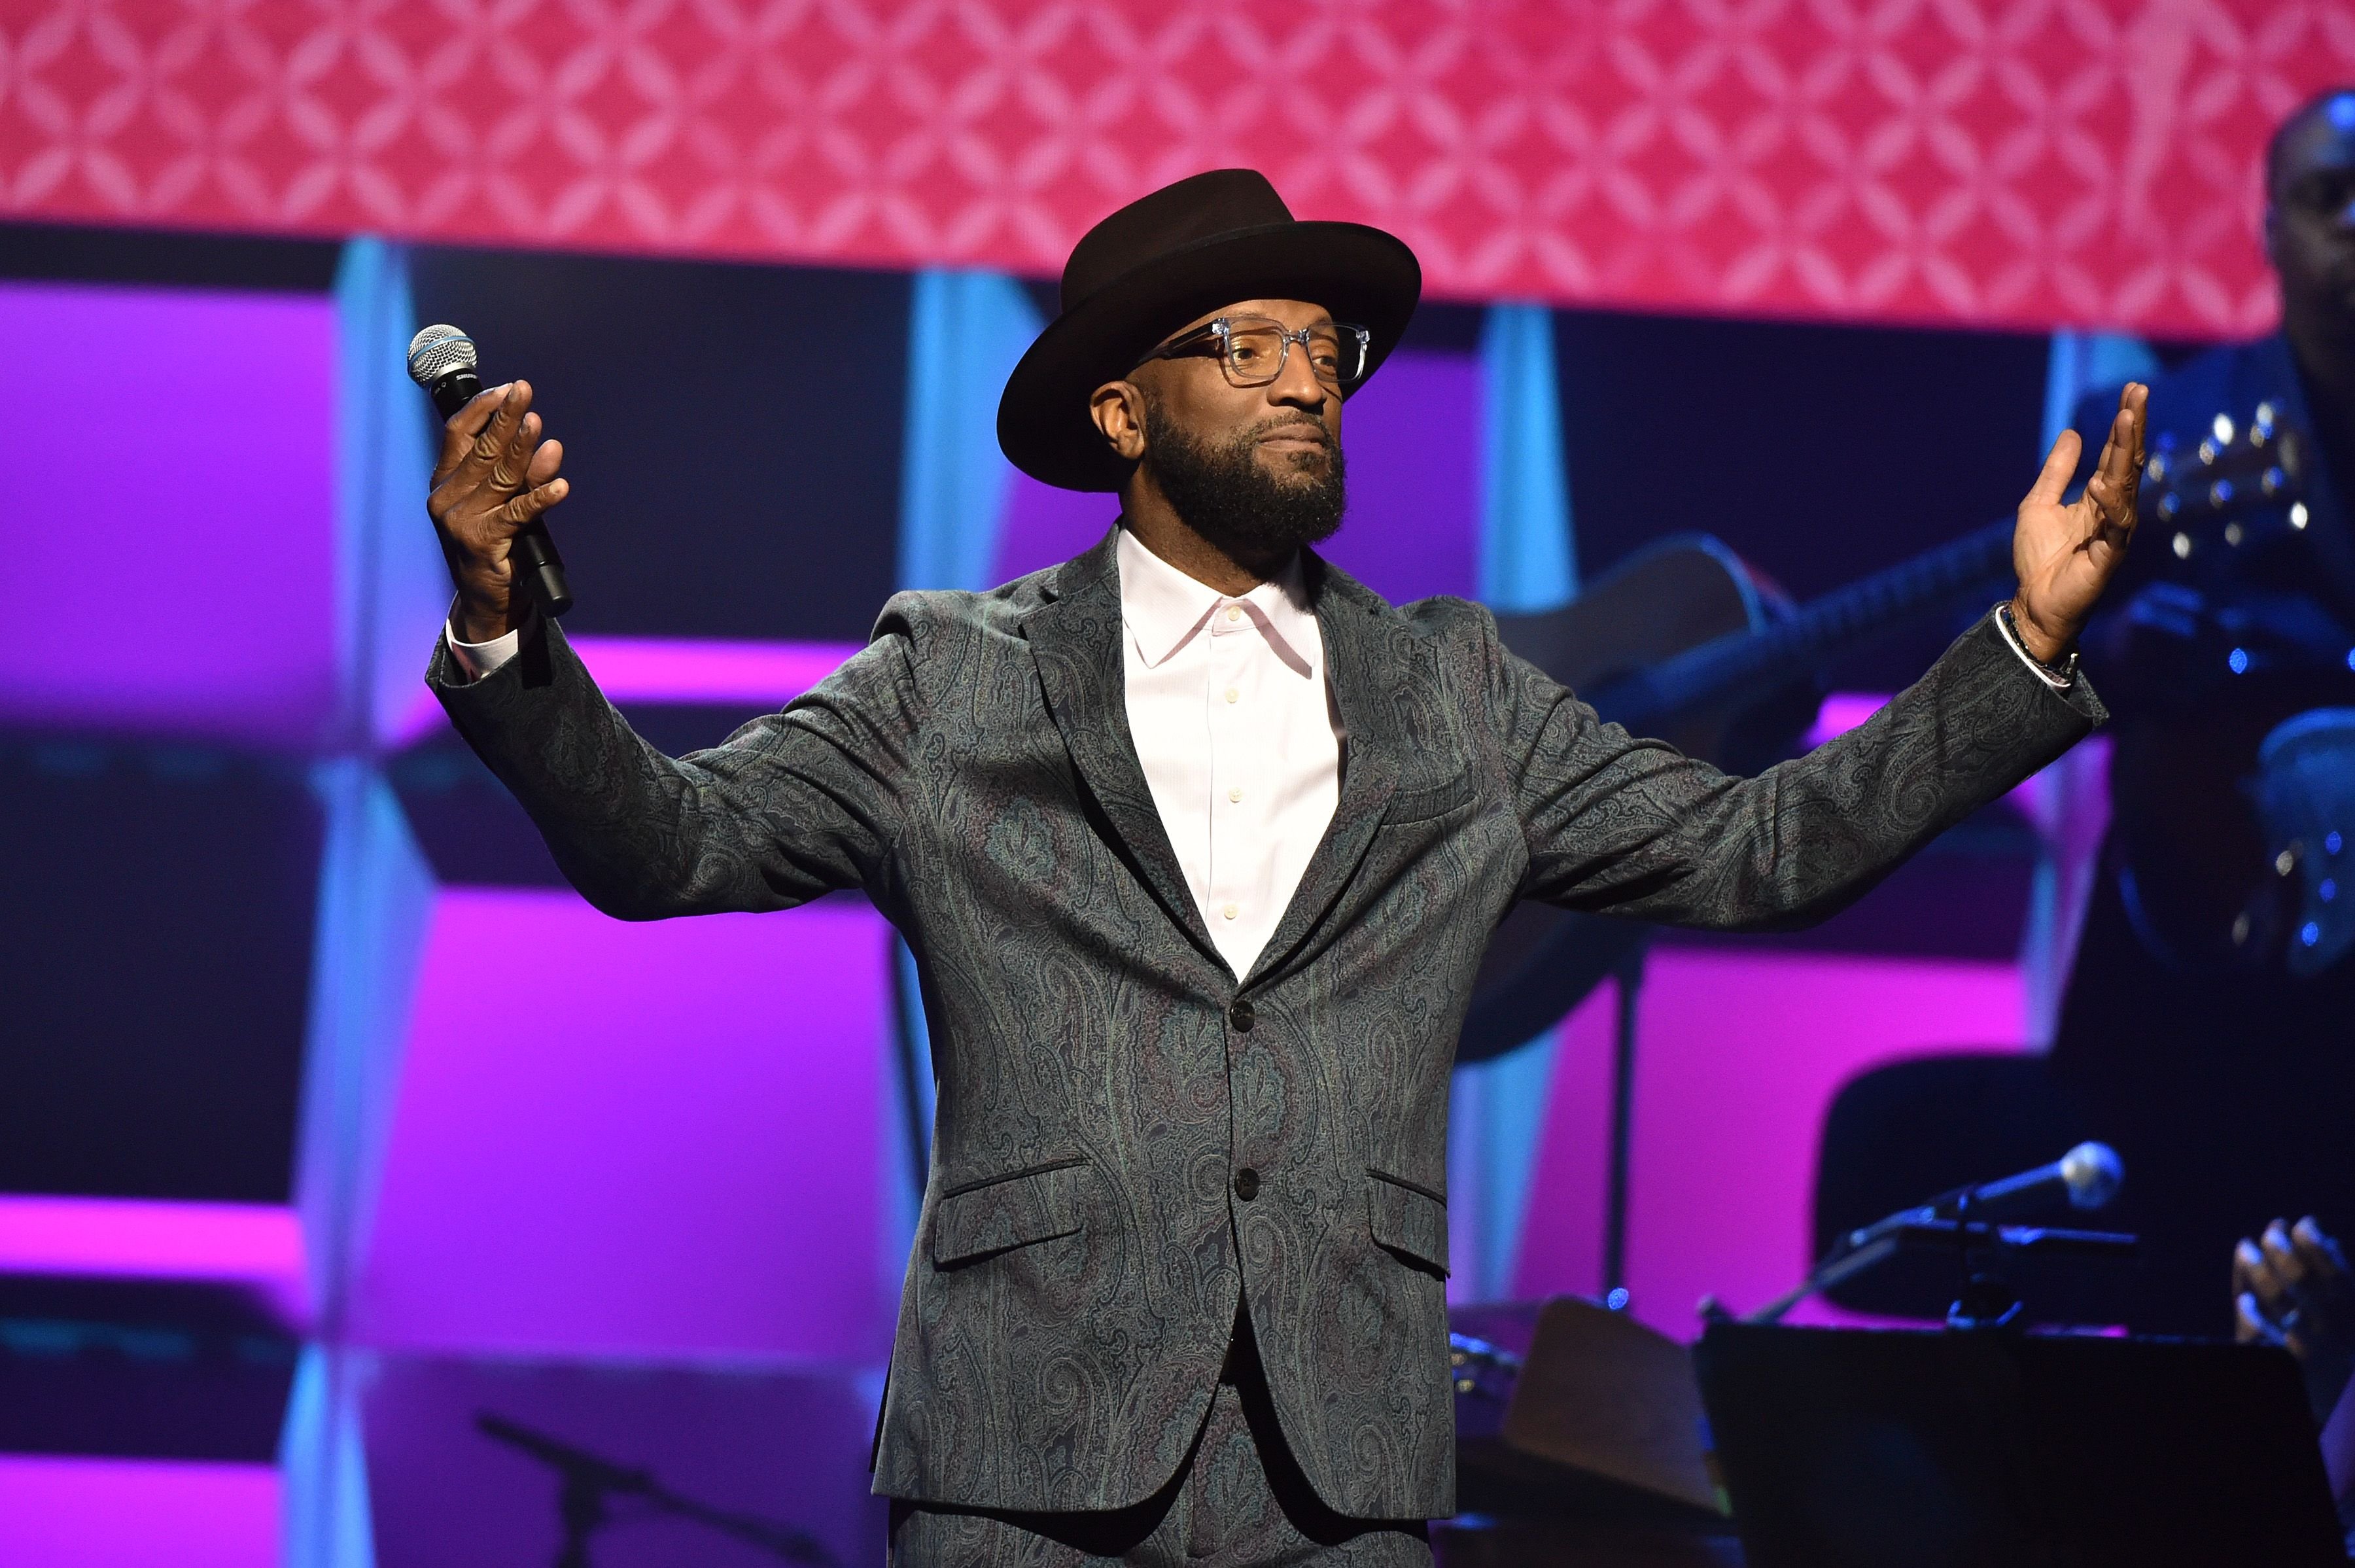 Rickey Smiley onstage hosting the BET Super Bowl Gospel Celebration at the James L. Knight Center on January 30, 2020 in Miami, Florida. | Photo: Getty Images